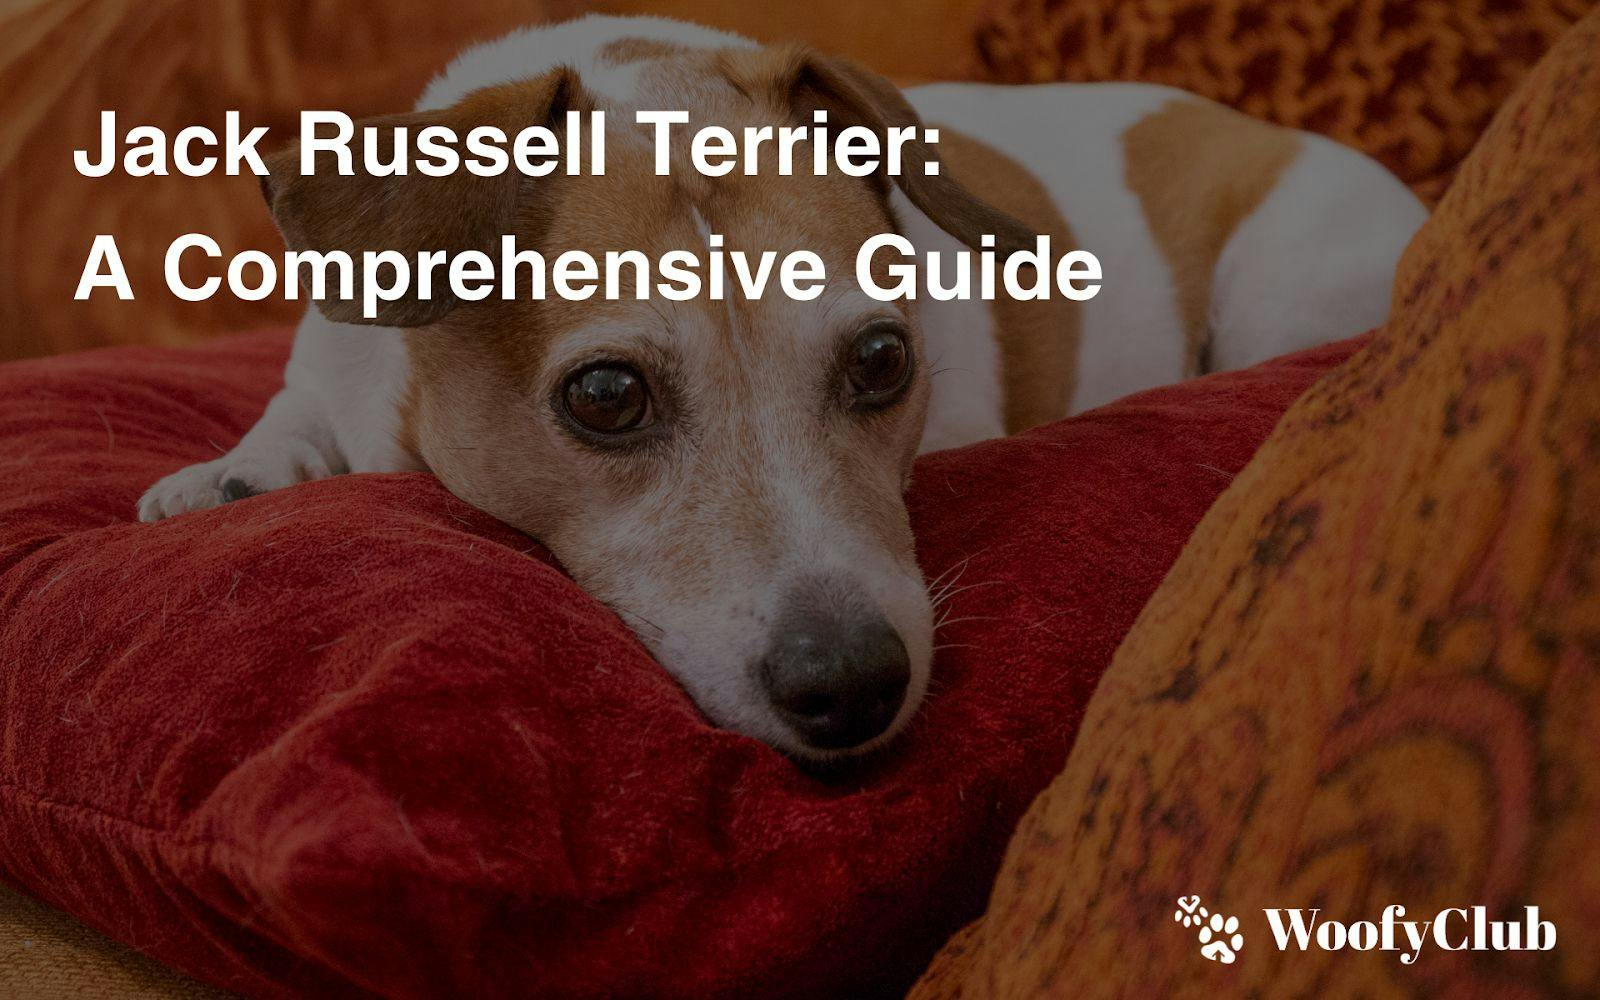 Jack Russell Terrier: A Comprehensive Guide